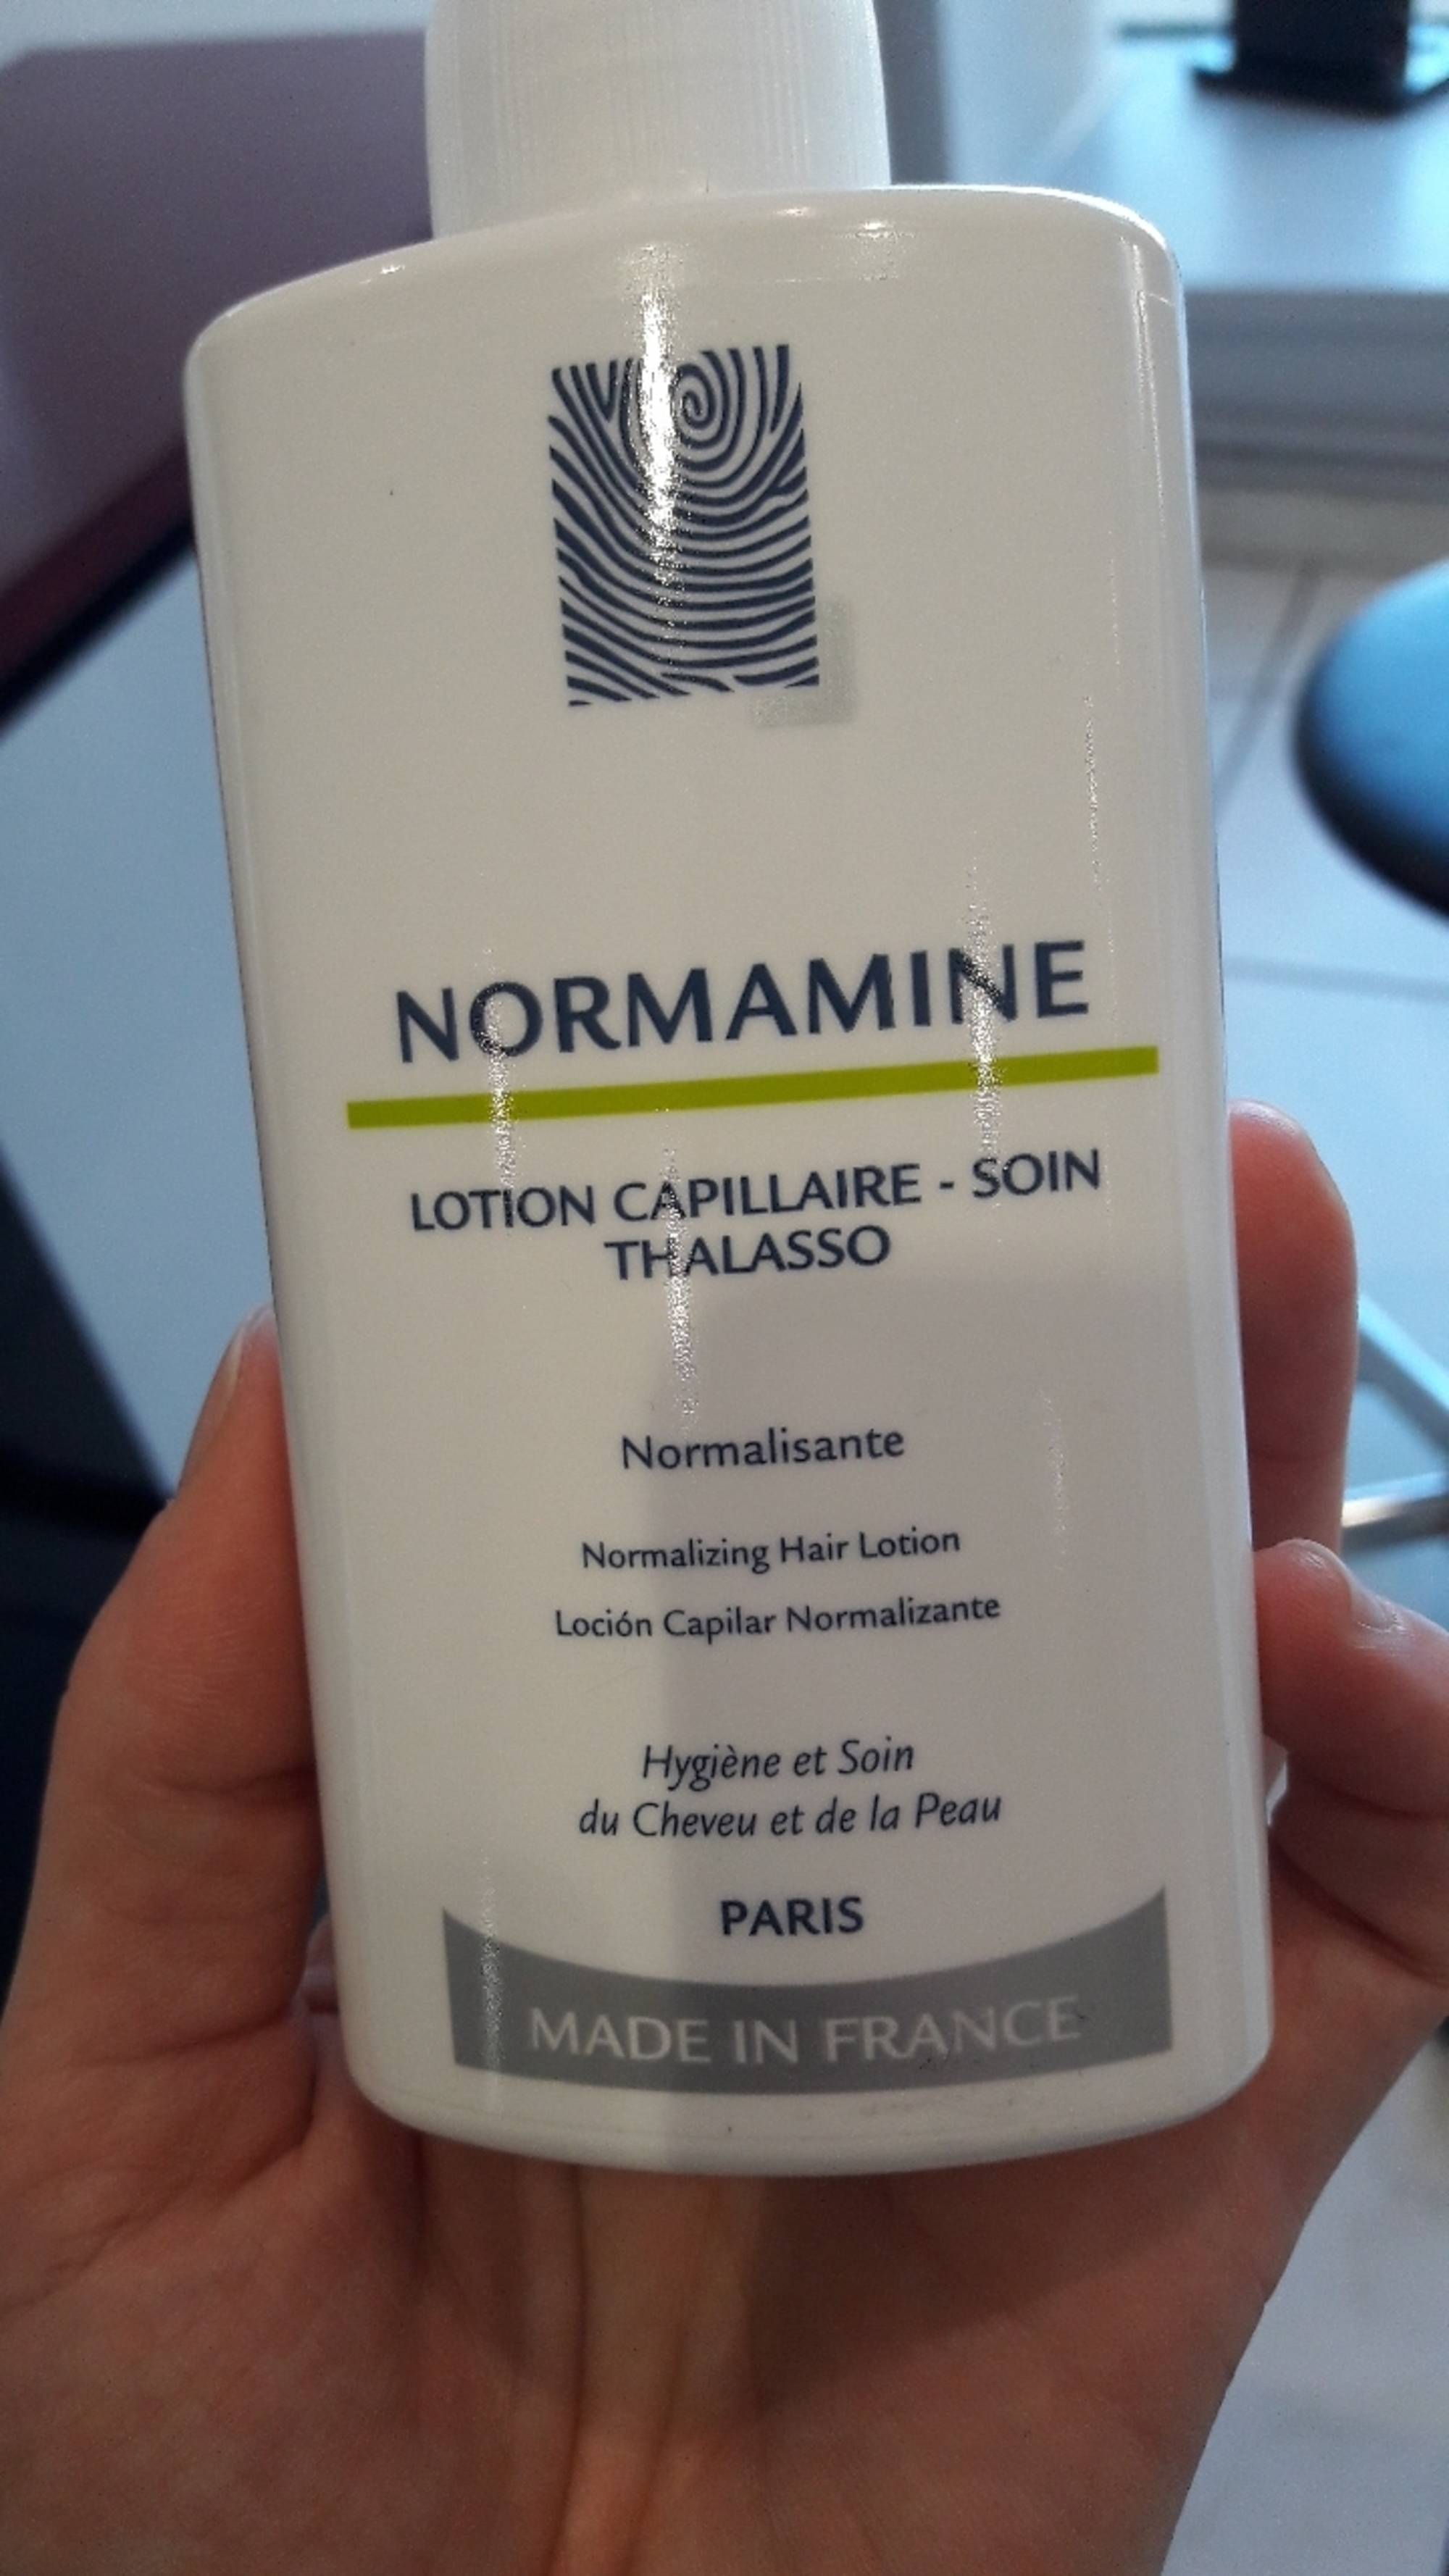 NORMAMINE - Lotion capillaire - Soin thalasso